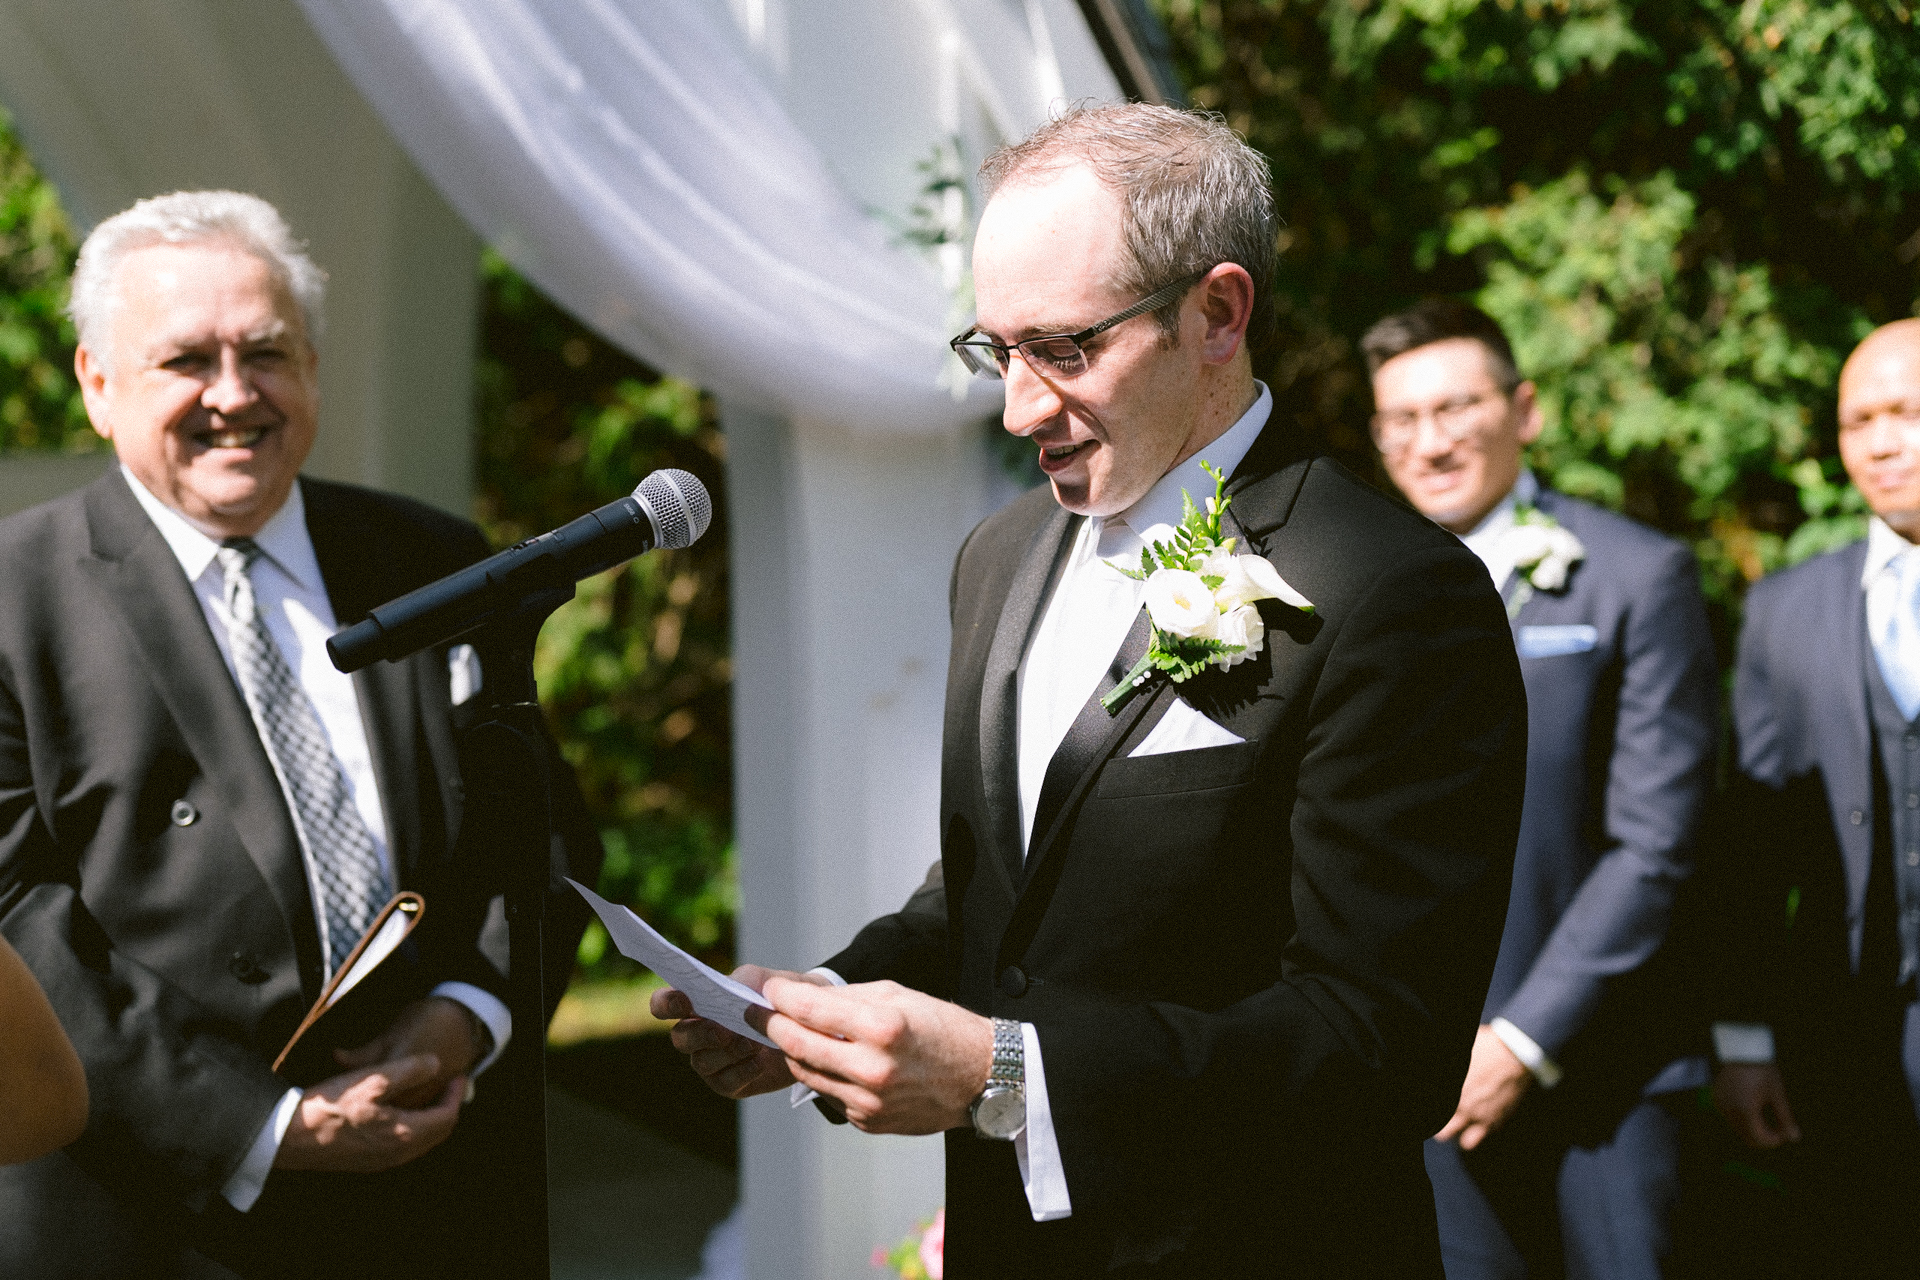 A man in a suit with a boutonniere reading from a paper at an outdoor wedding ceremony, with an officiant and groomsmen looking on.